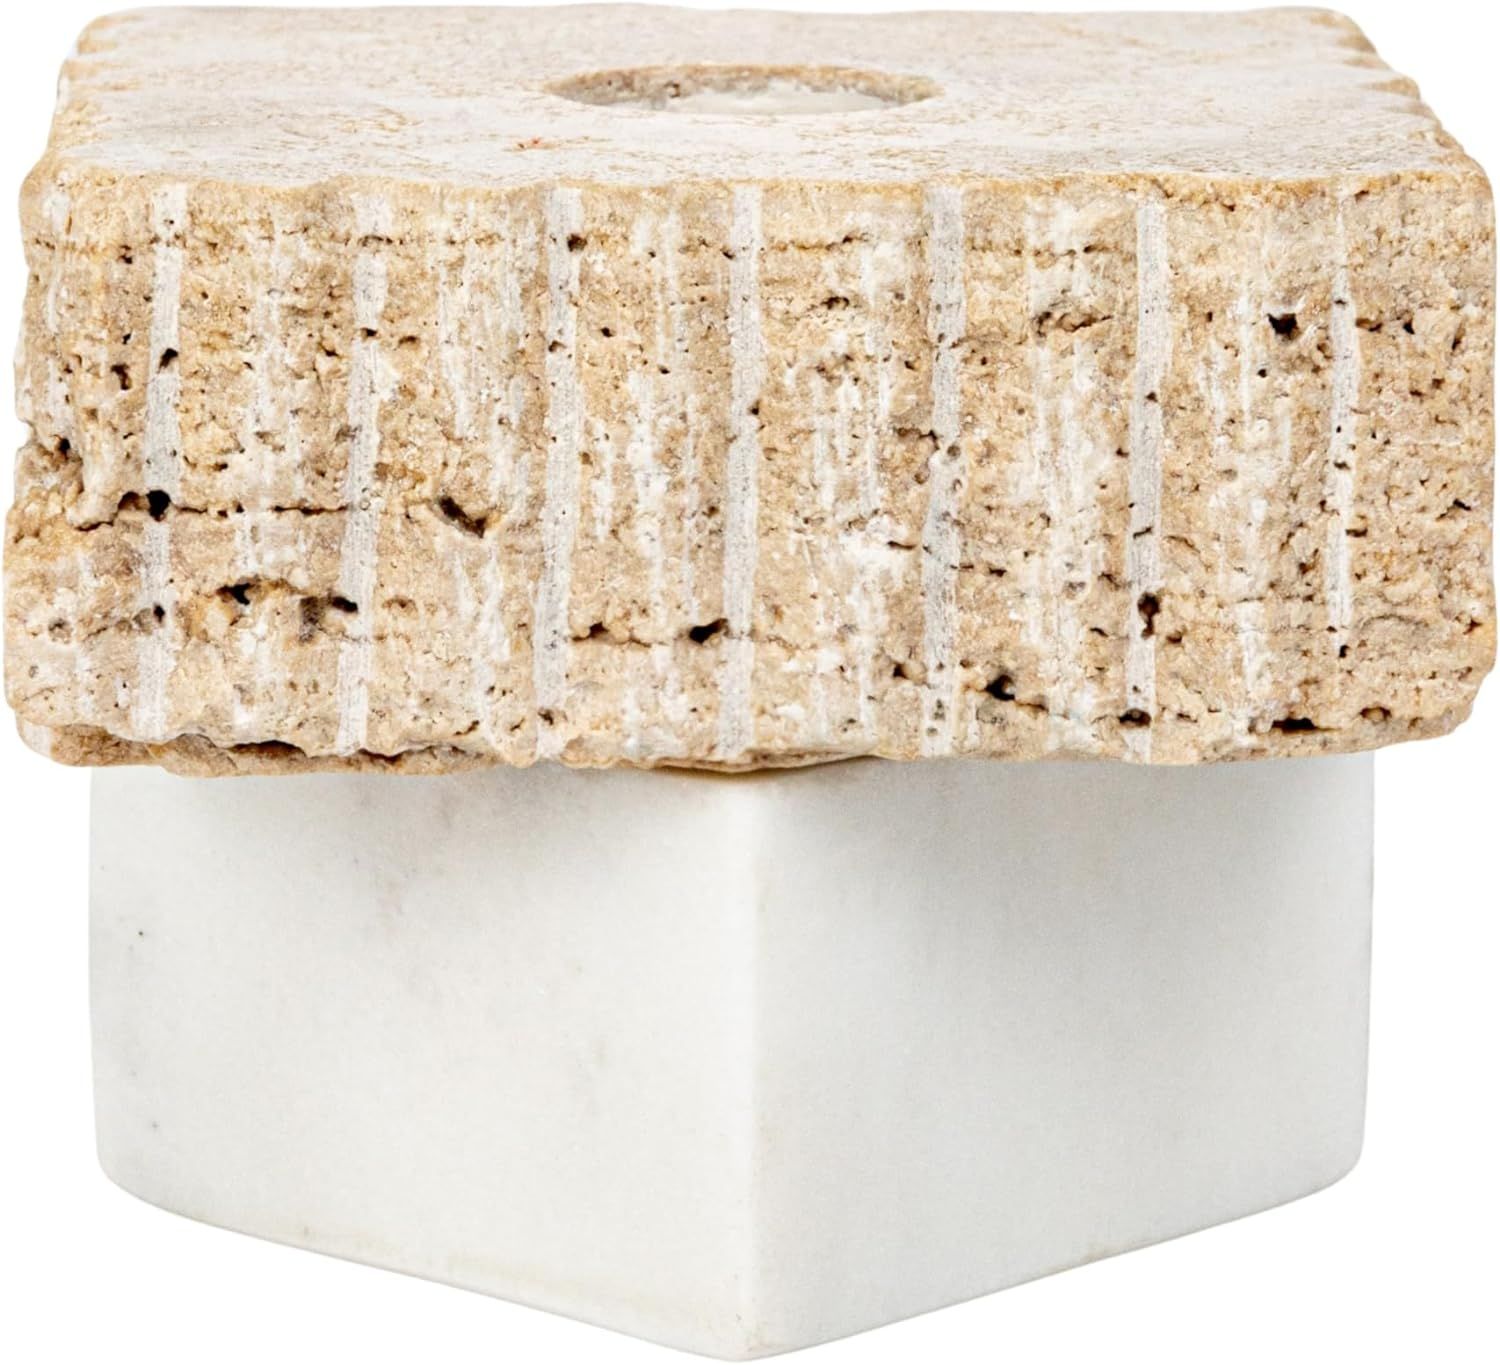 Bloomingville Decorative Marble and Travertine Candle Holder, White and Natural | Amazon (US)